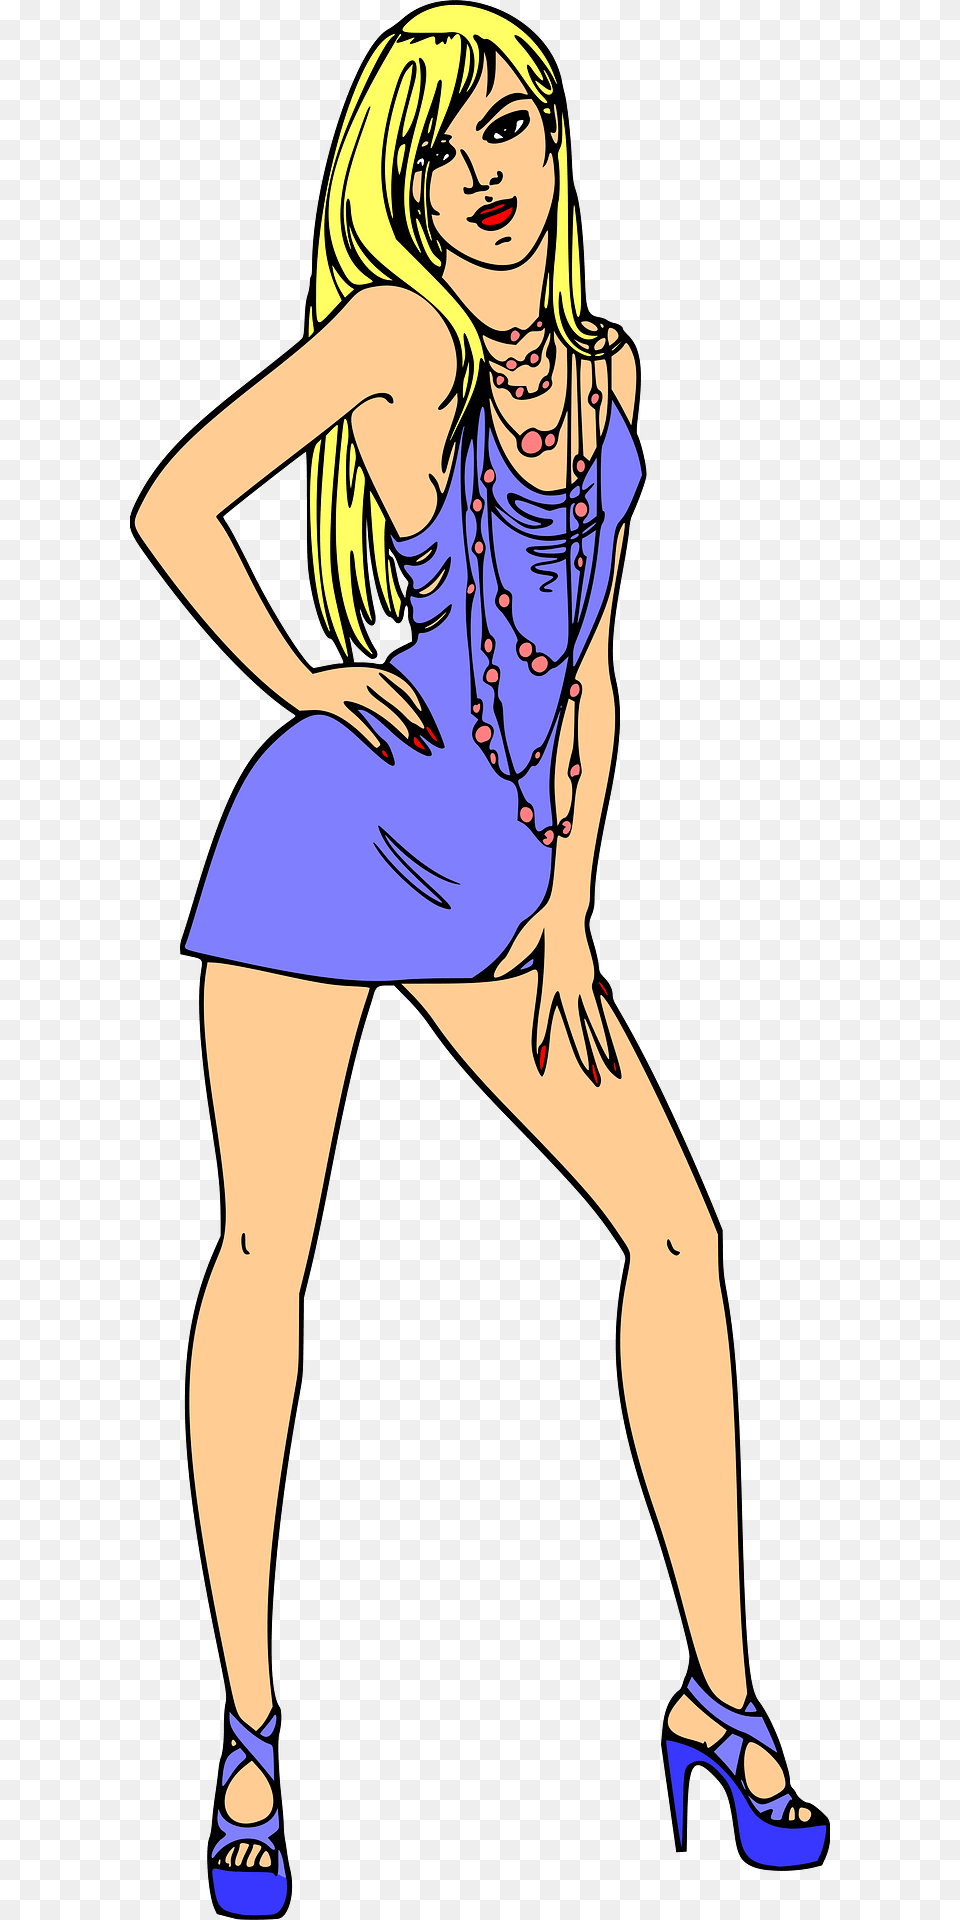 Light Skin Blond Woman In Short Blue Dress Clipart, Accessories, Shoe, Clothing, Necklace Free Transparent Png